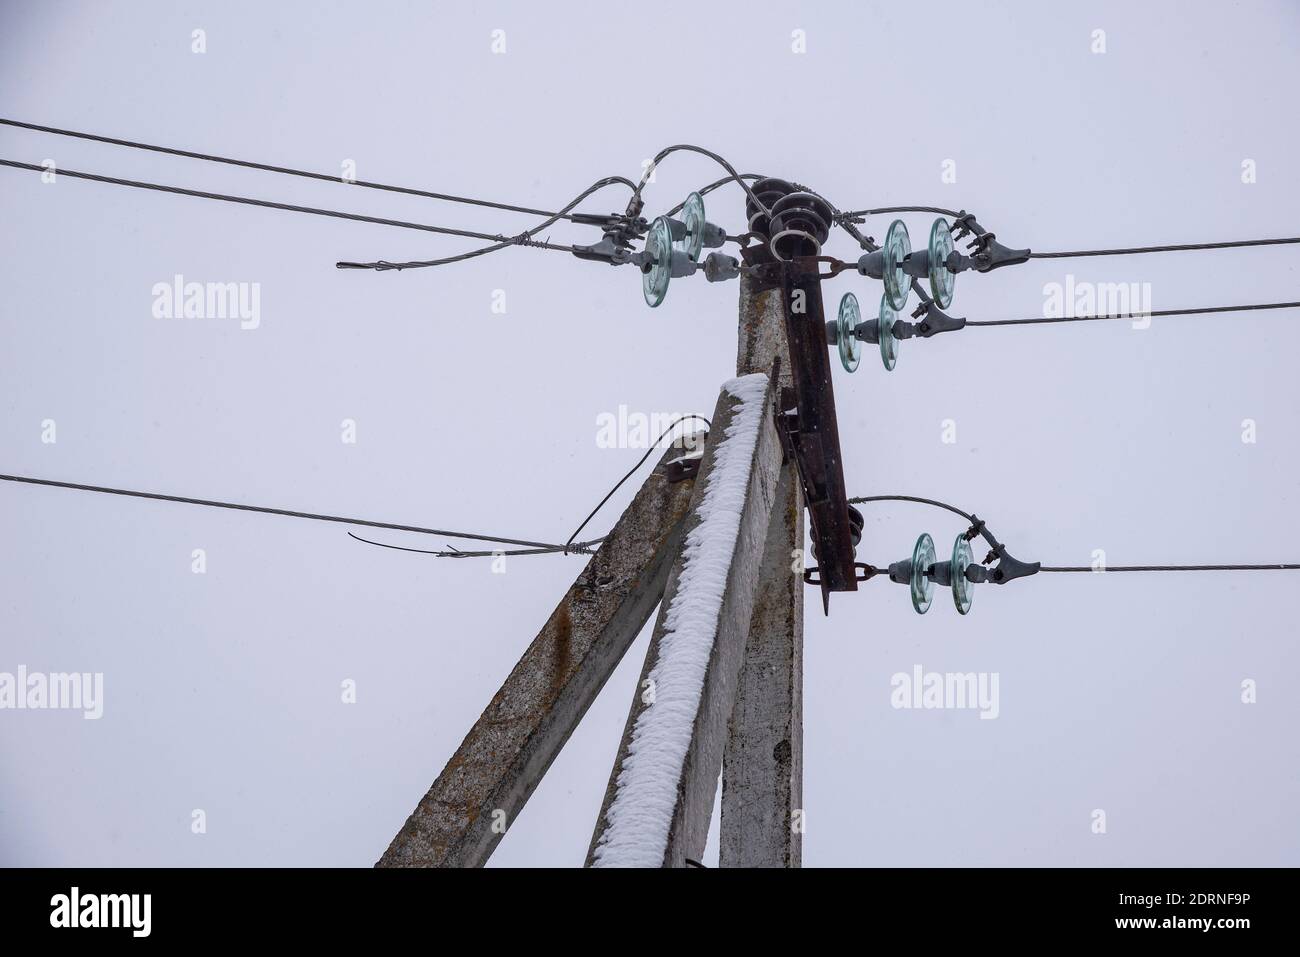 Power line sprinkled with snow against the background of a cloudy sky on a winter day. Stock Photo